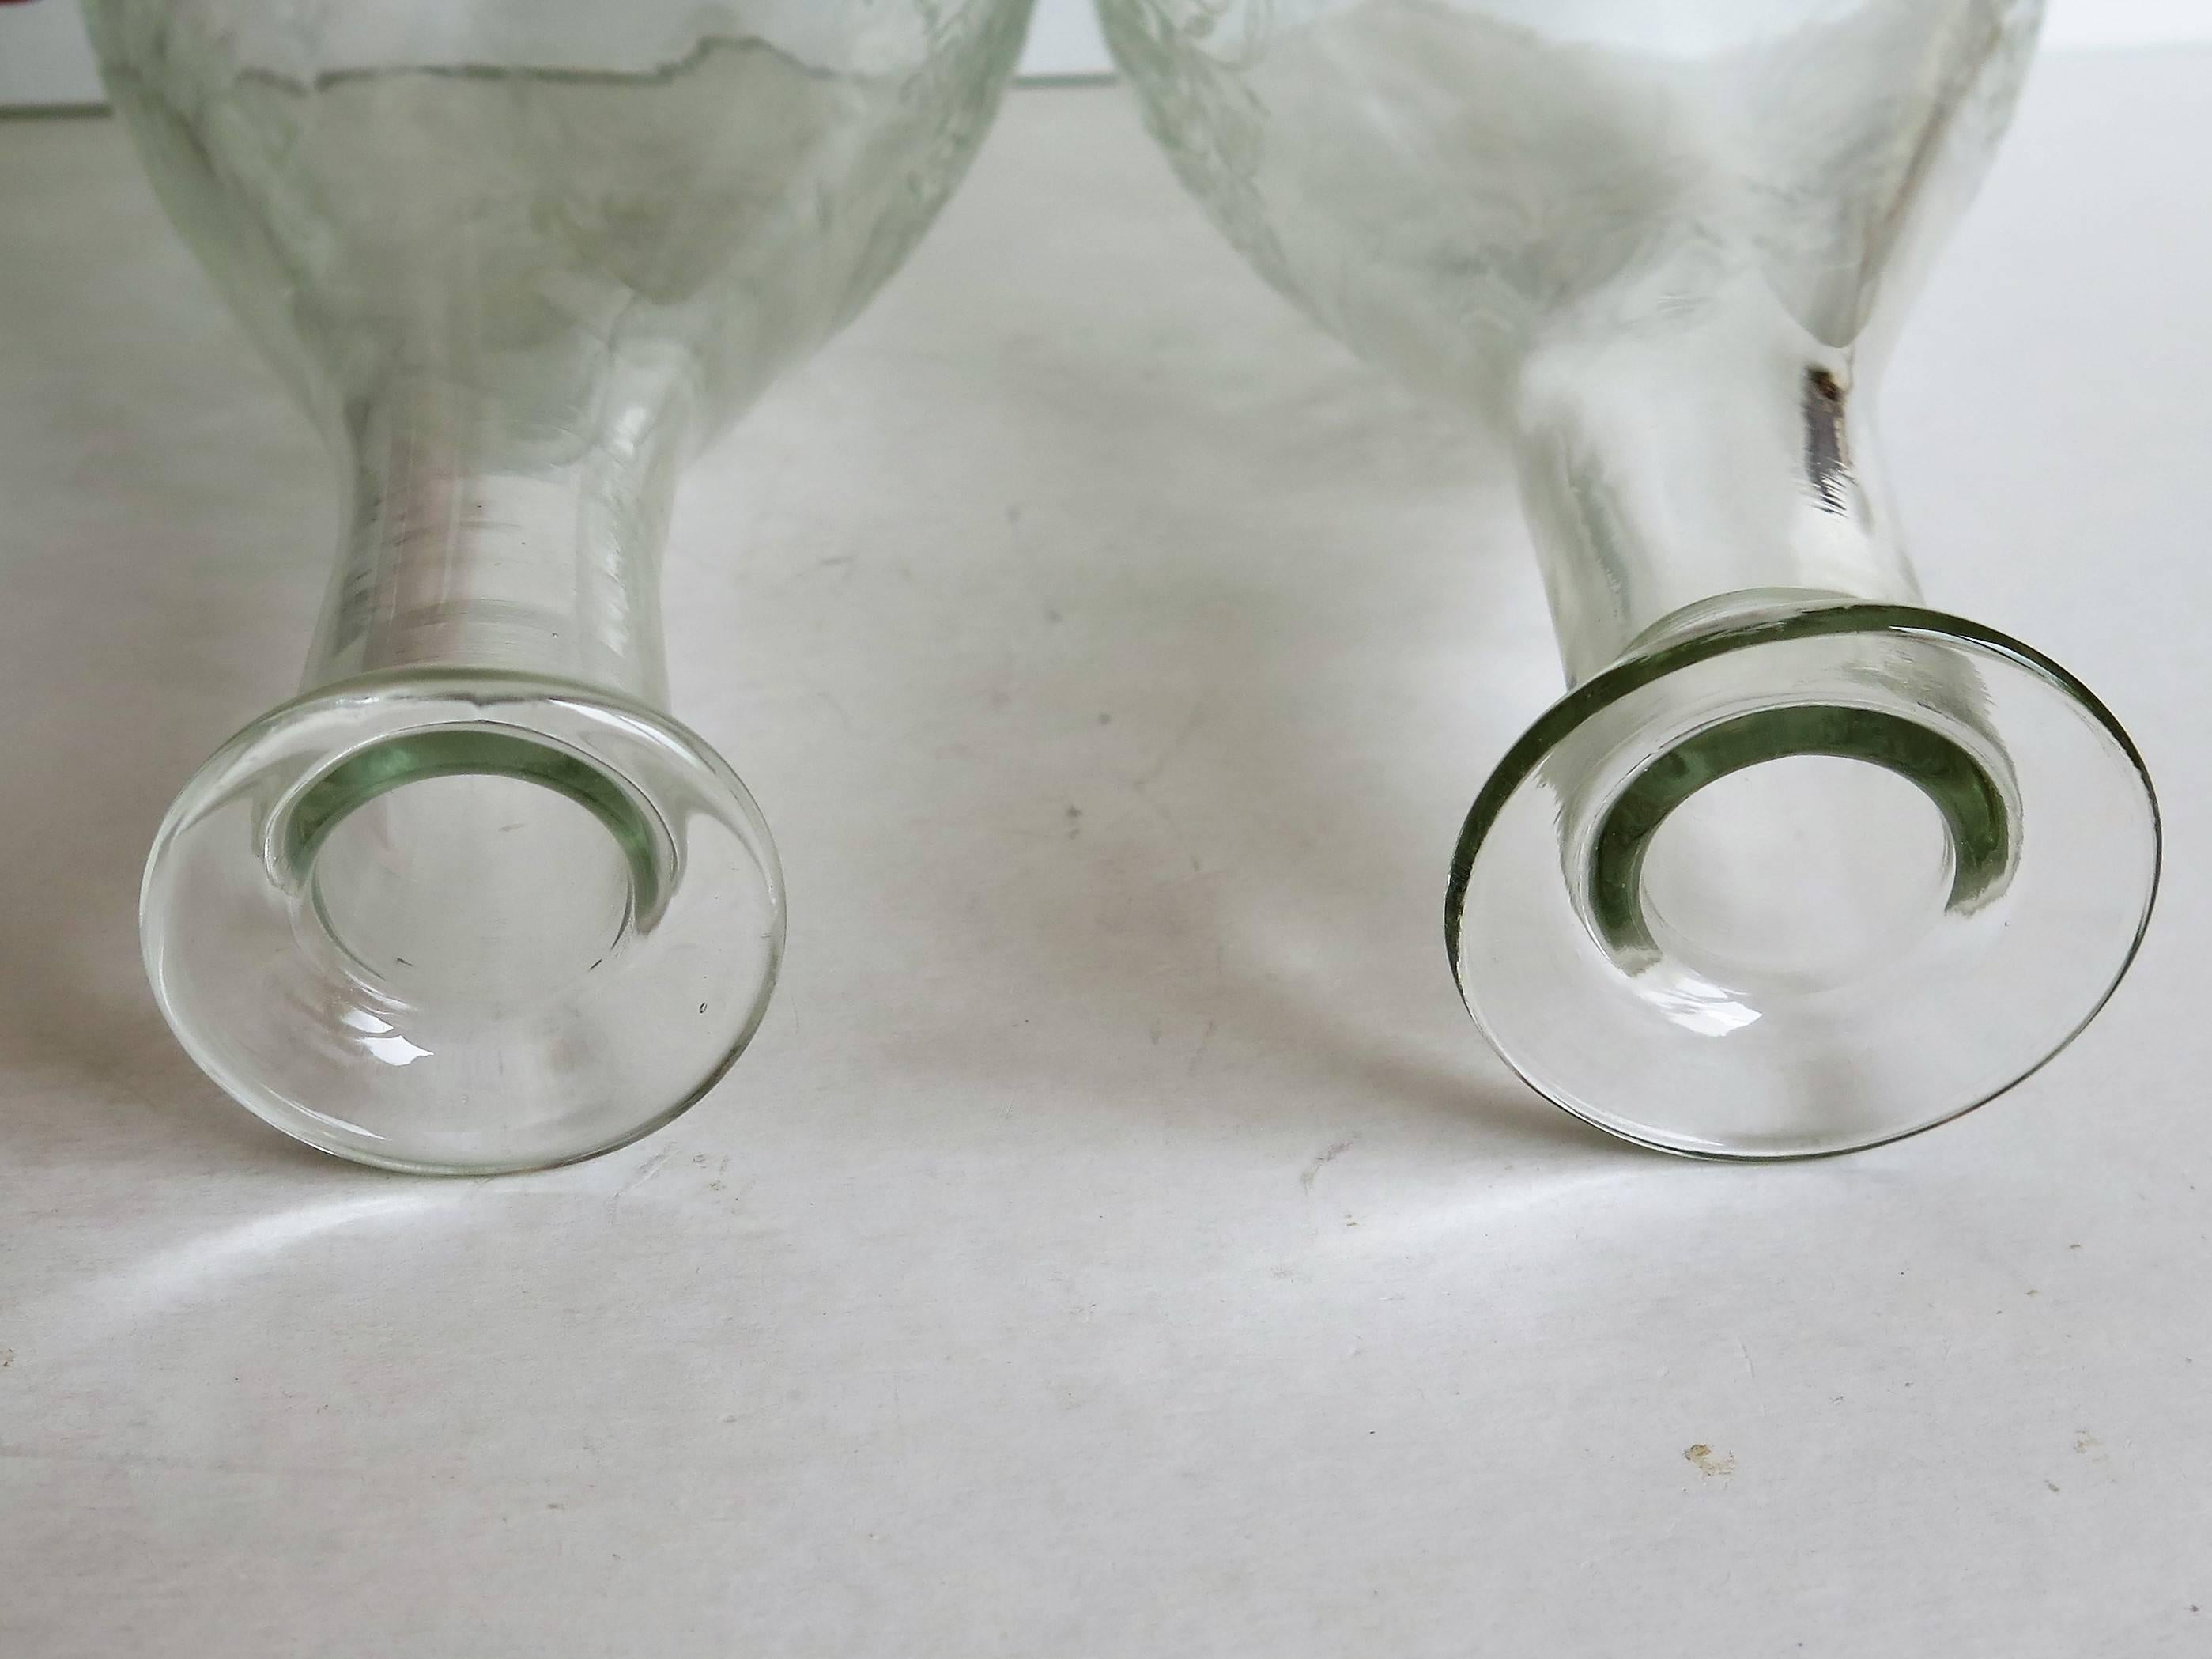 Fine Pair 19th C. Lead Crystal Glass Carafes or Decanters Hand Blown & Engraved 2